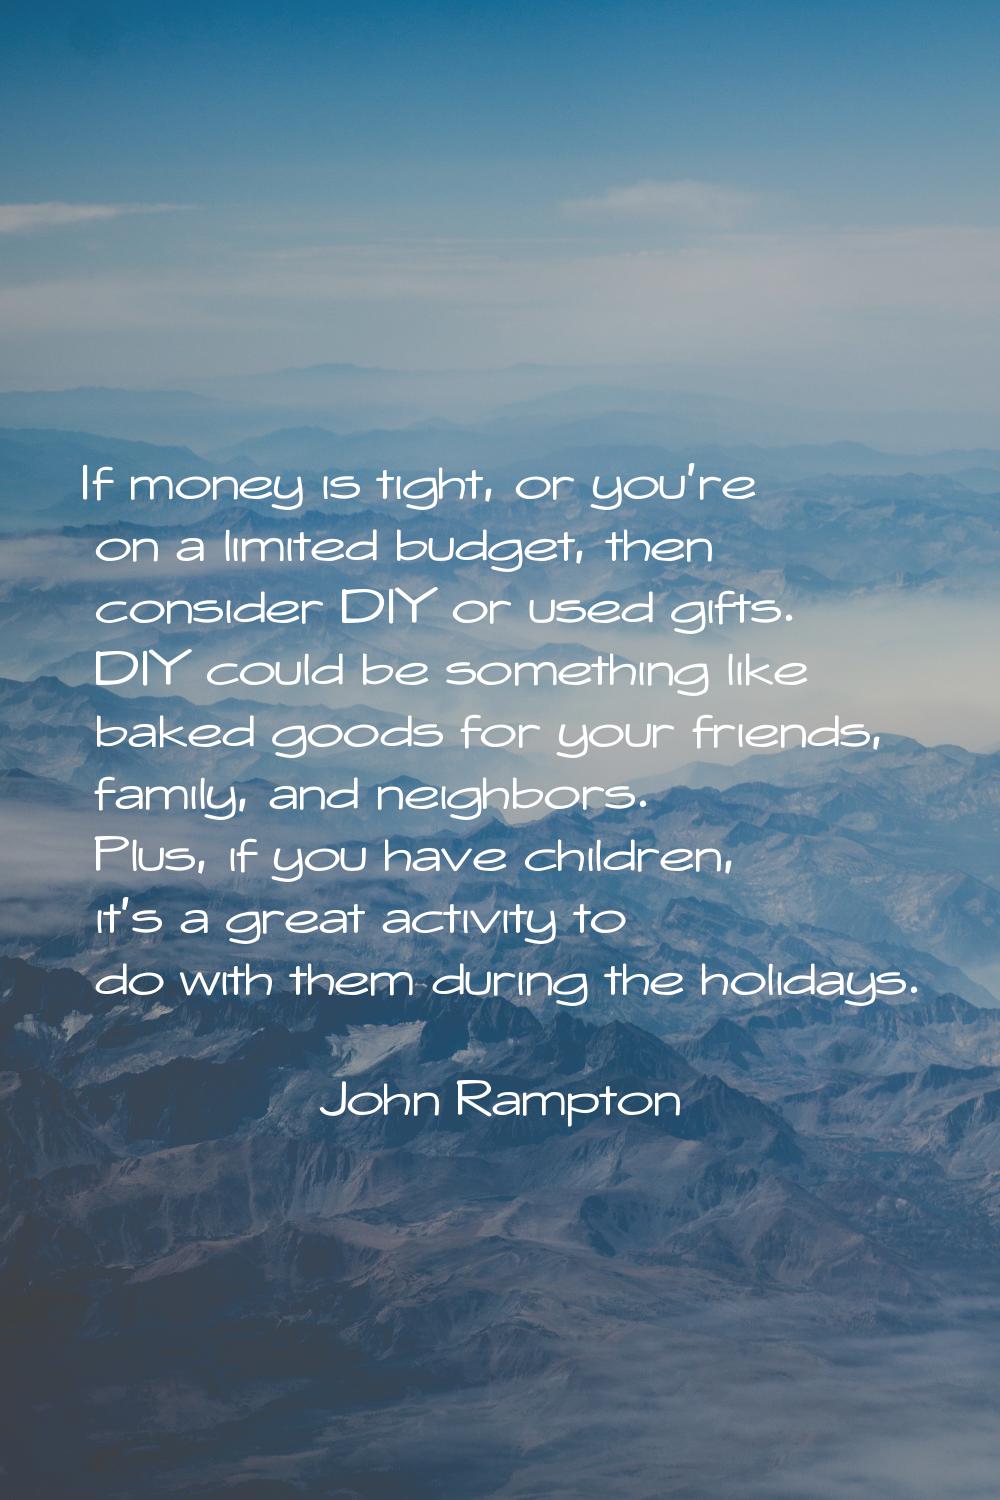 If money is tight, or you're on a limited budget, then consider DIY or used gifts. DIY could be som